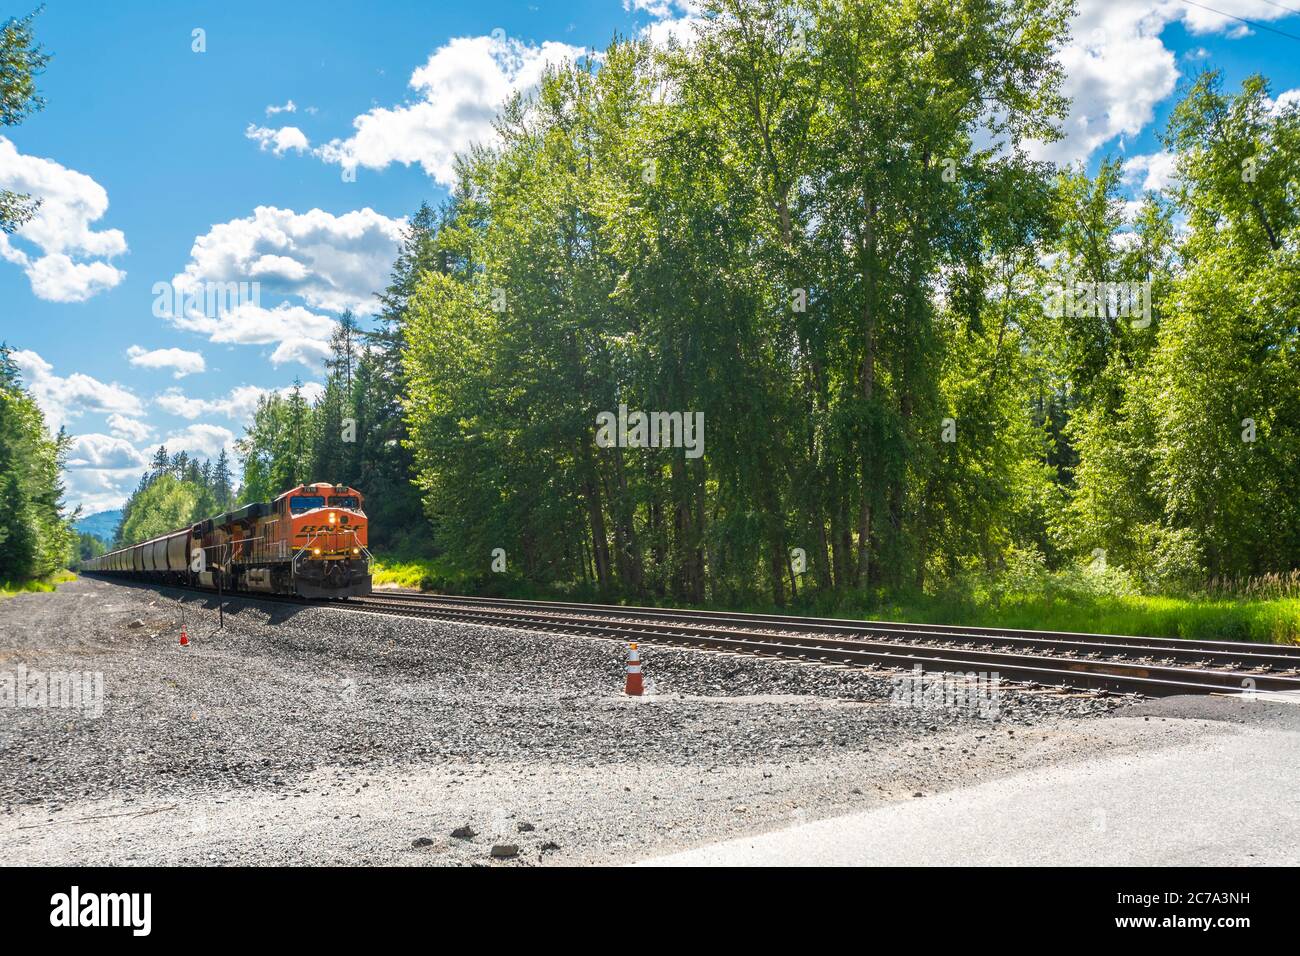 A train locomotive moving on the tracks heads towards an intersection in a mountain town in North Idaho, USA Stock Photo